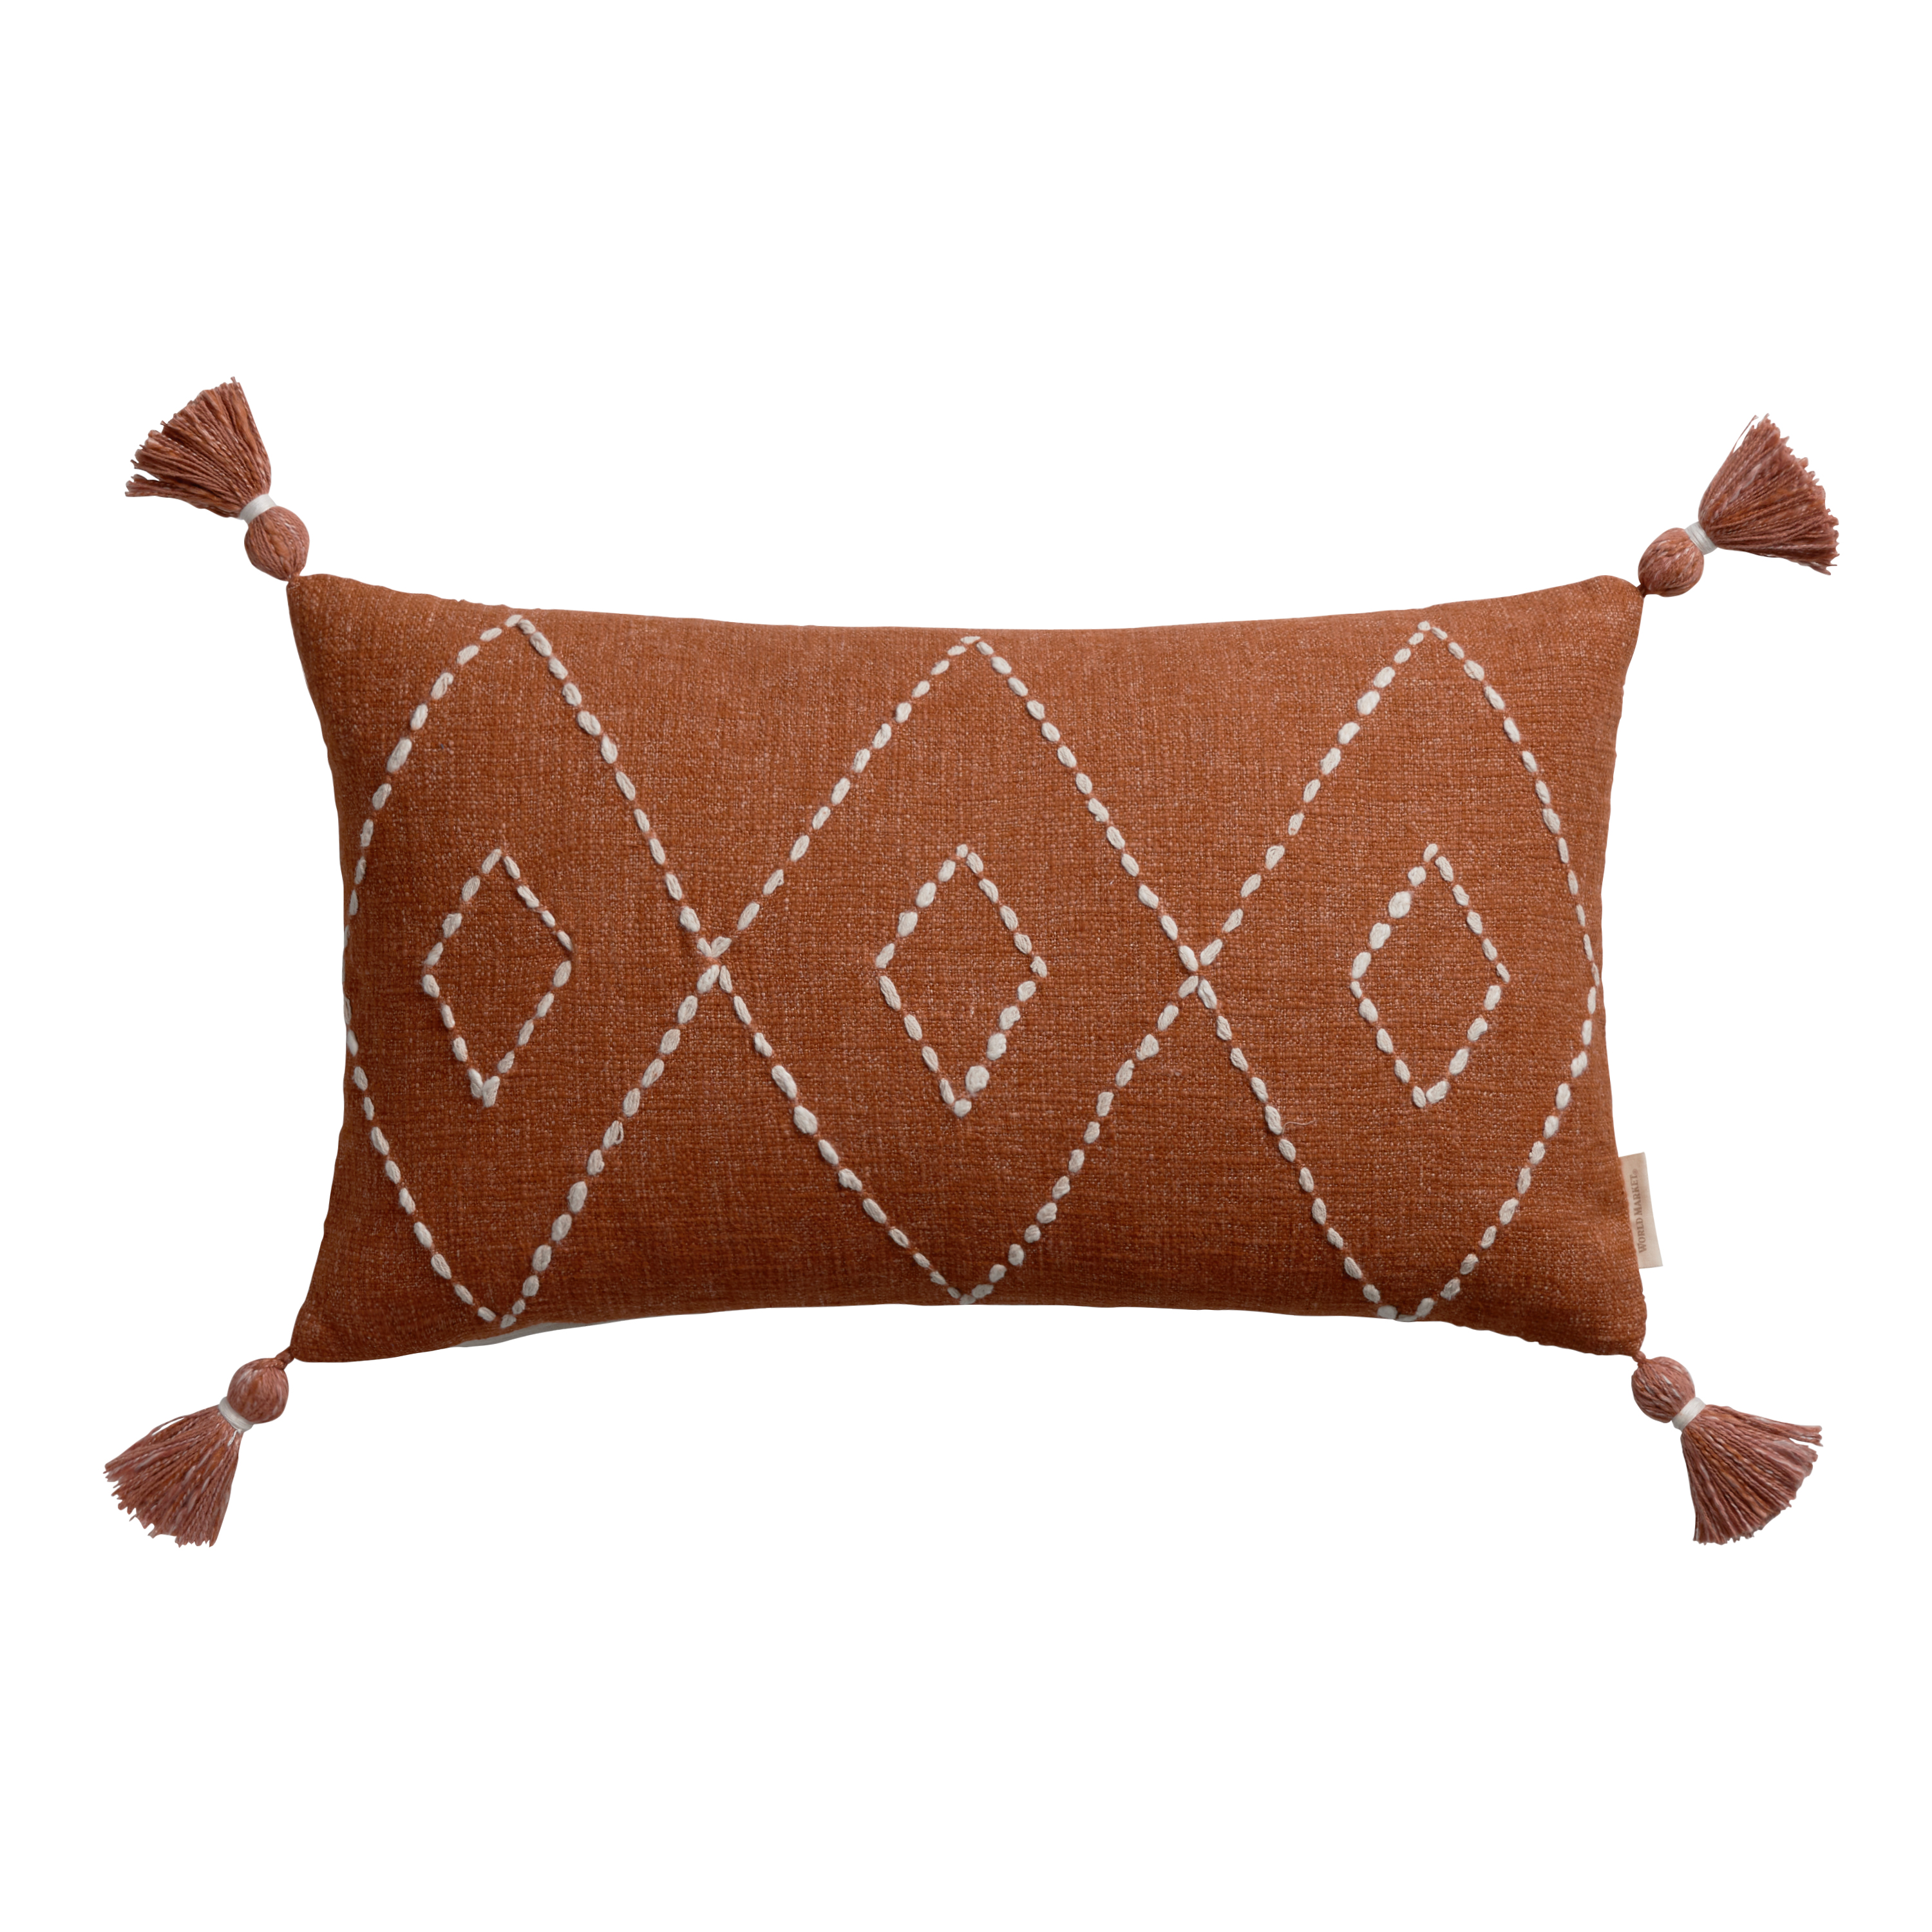 Extra Wide Ivory Checkered Lumbar Pillow by World Market